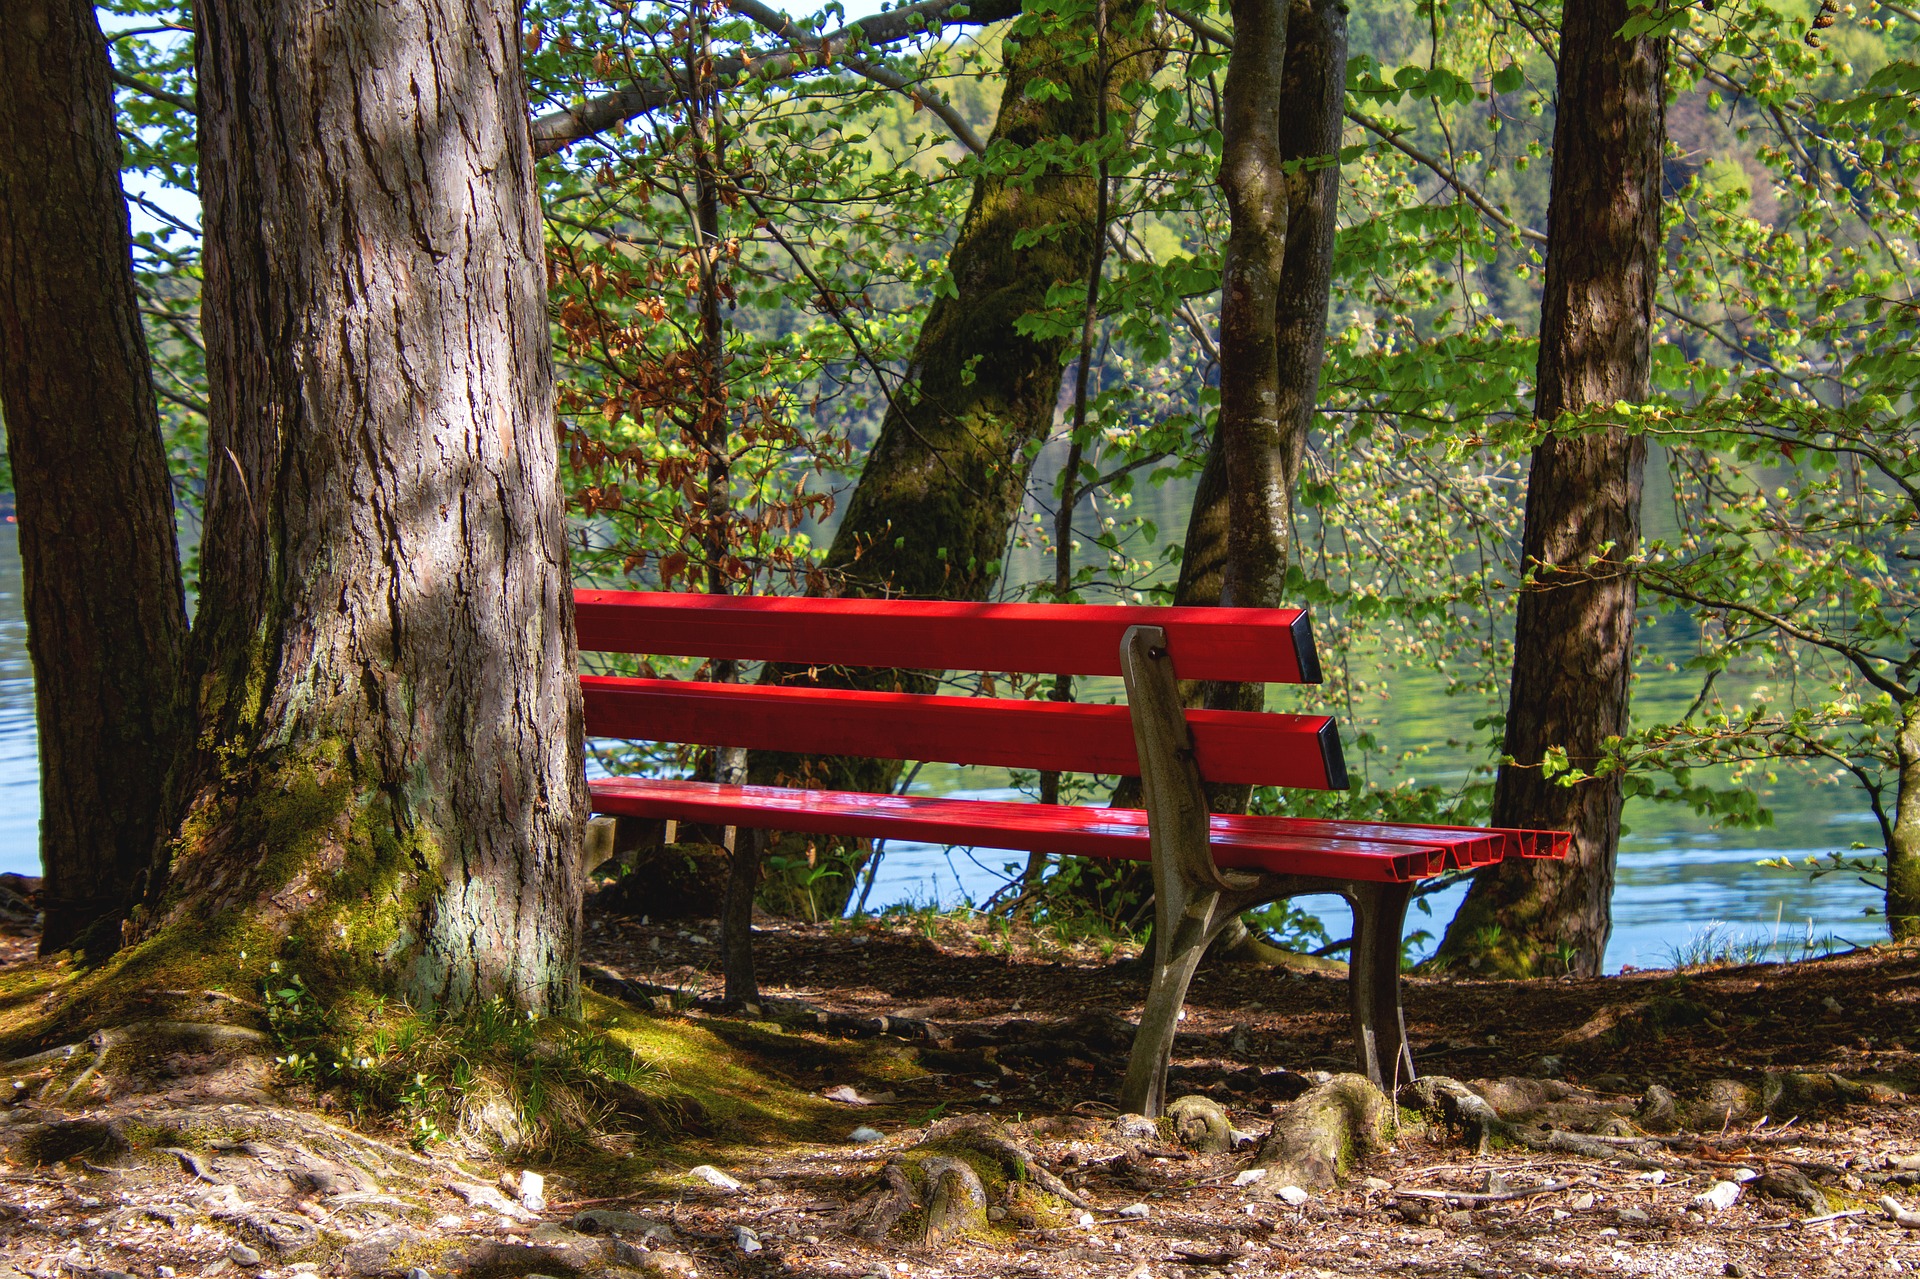 Red bench in forest overlooking water